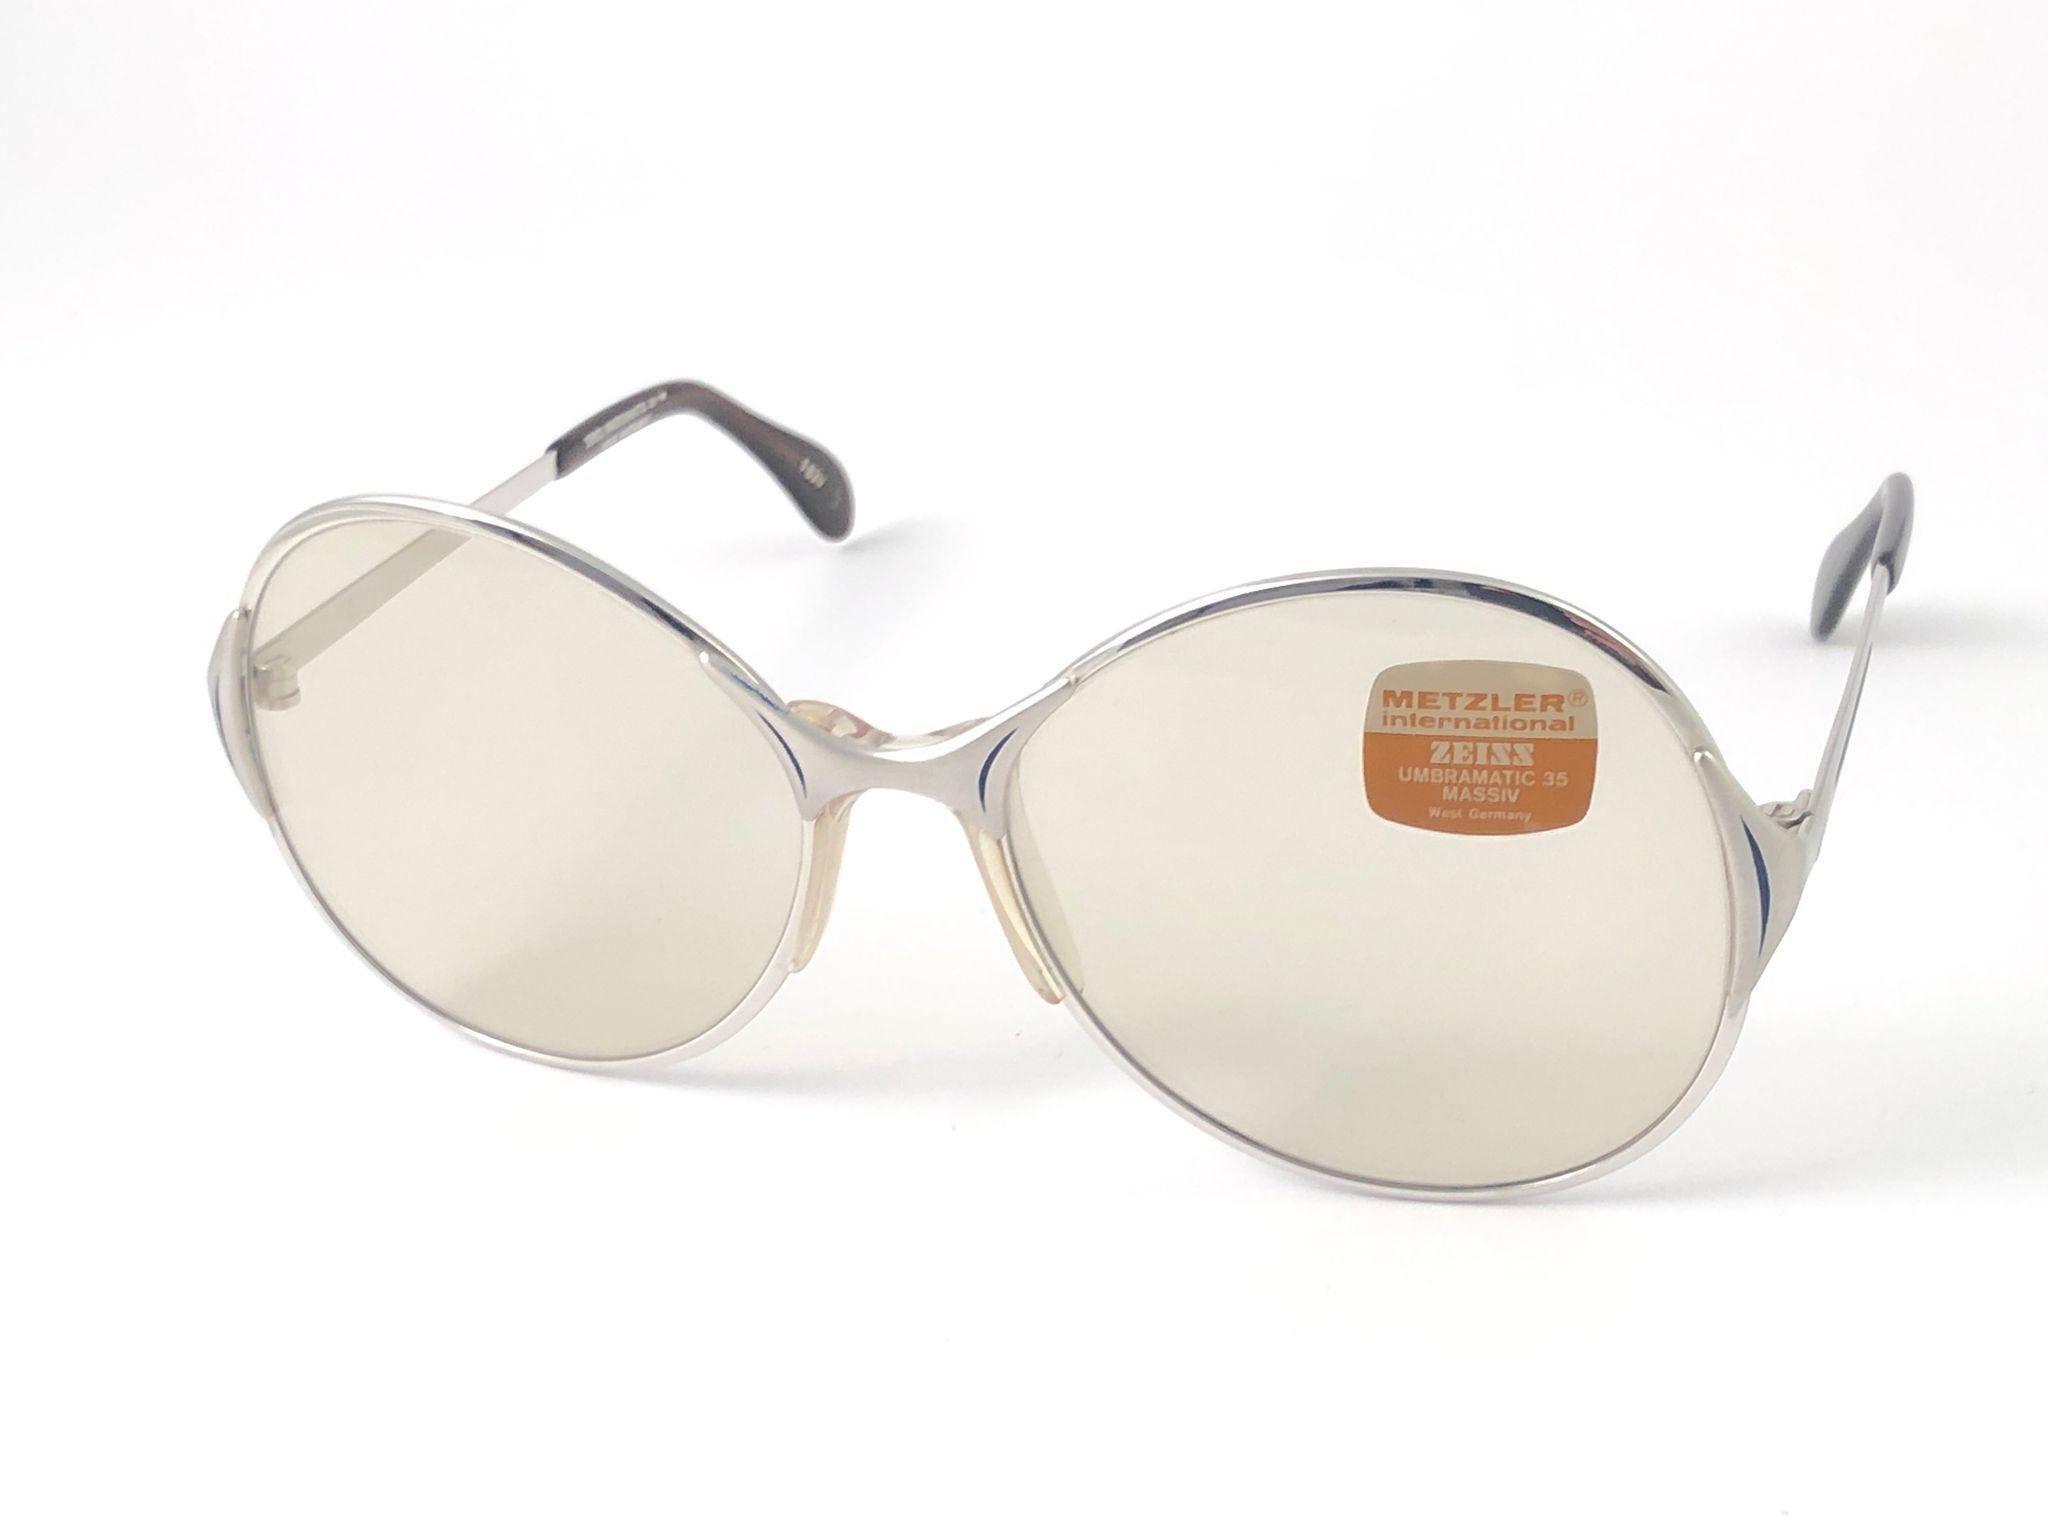 New Vintage Metzler Zeiss Umbramatic Butterfly Sunglasses West Germany 1980's For Sale 4